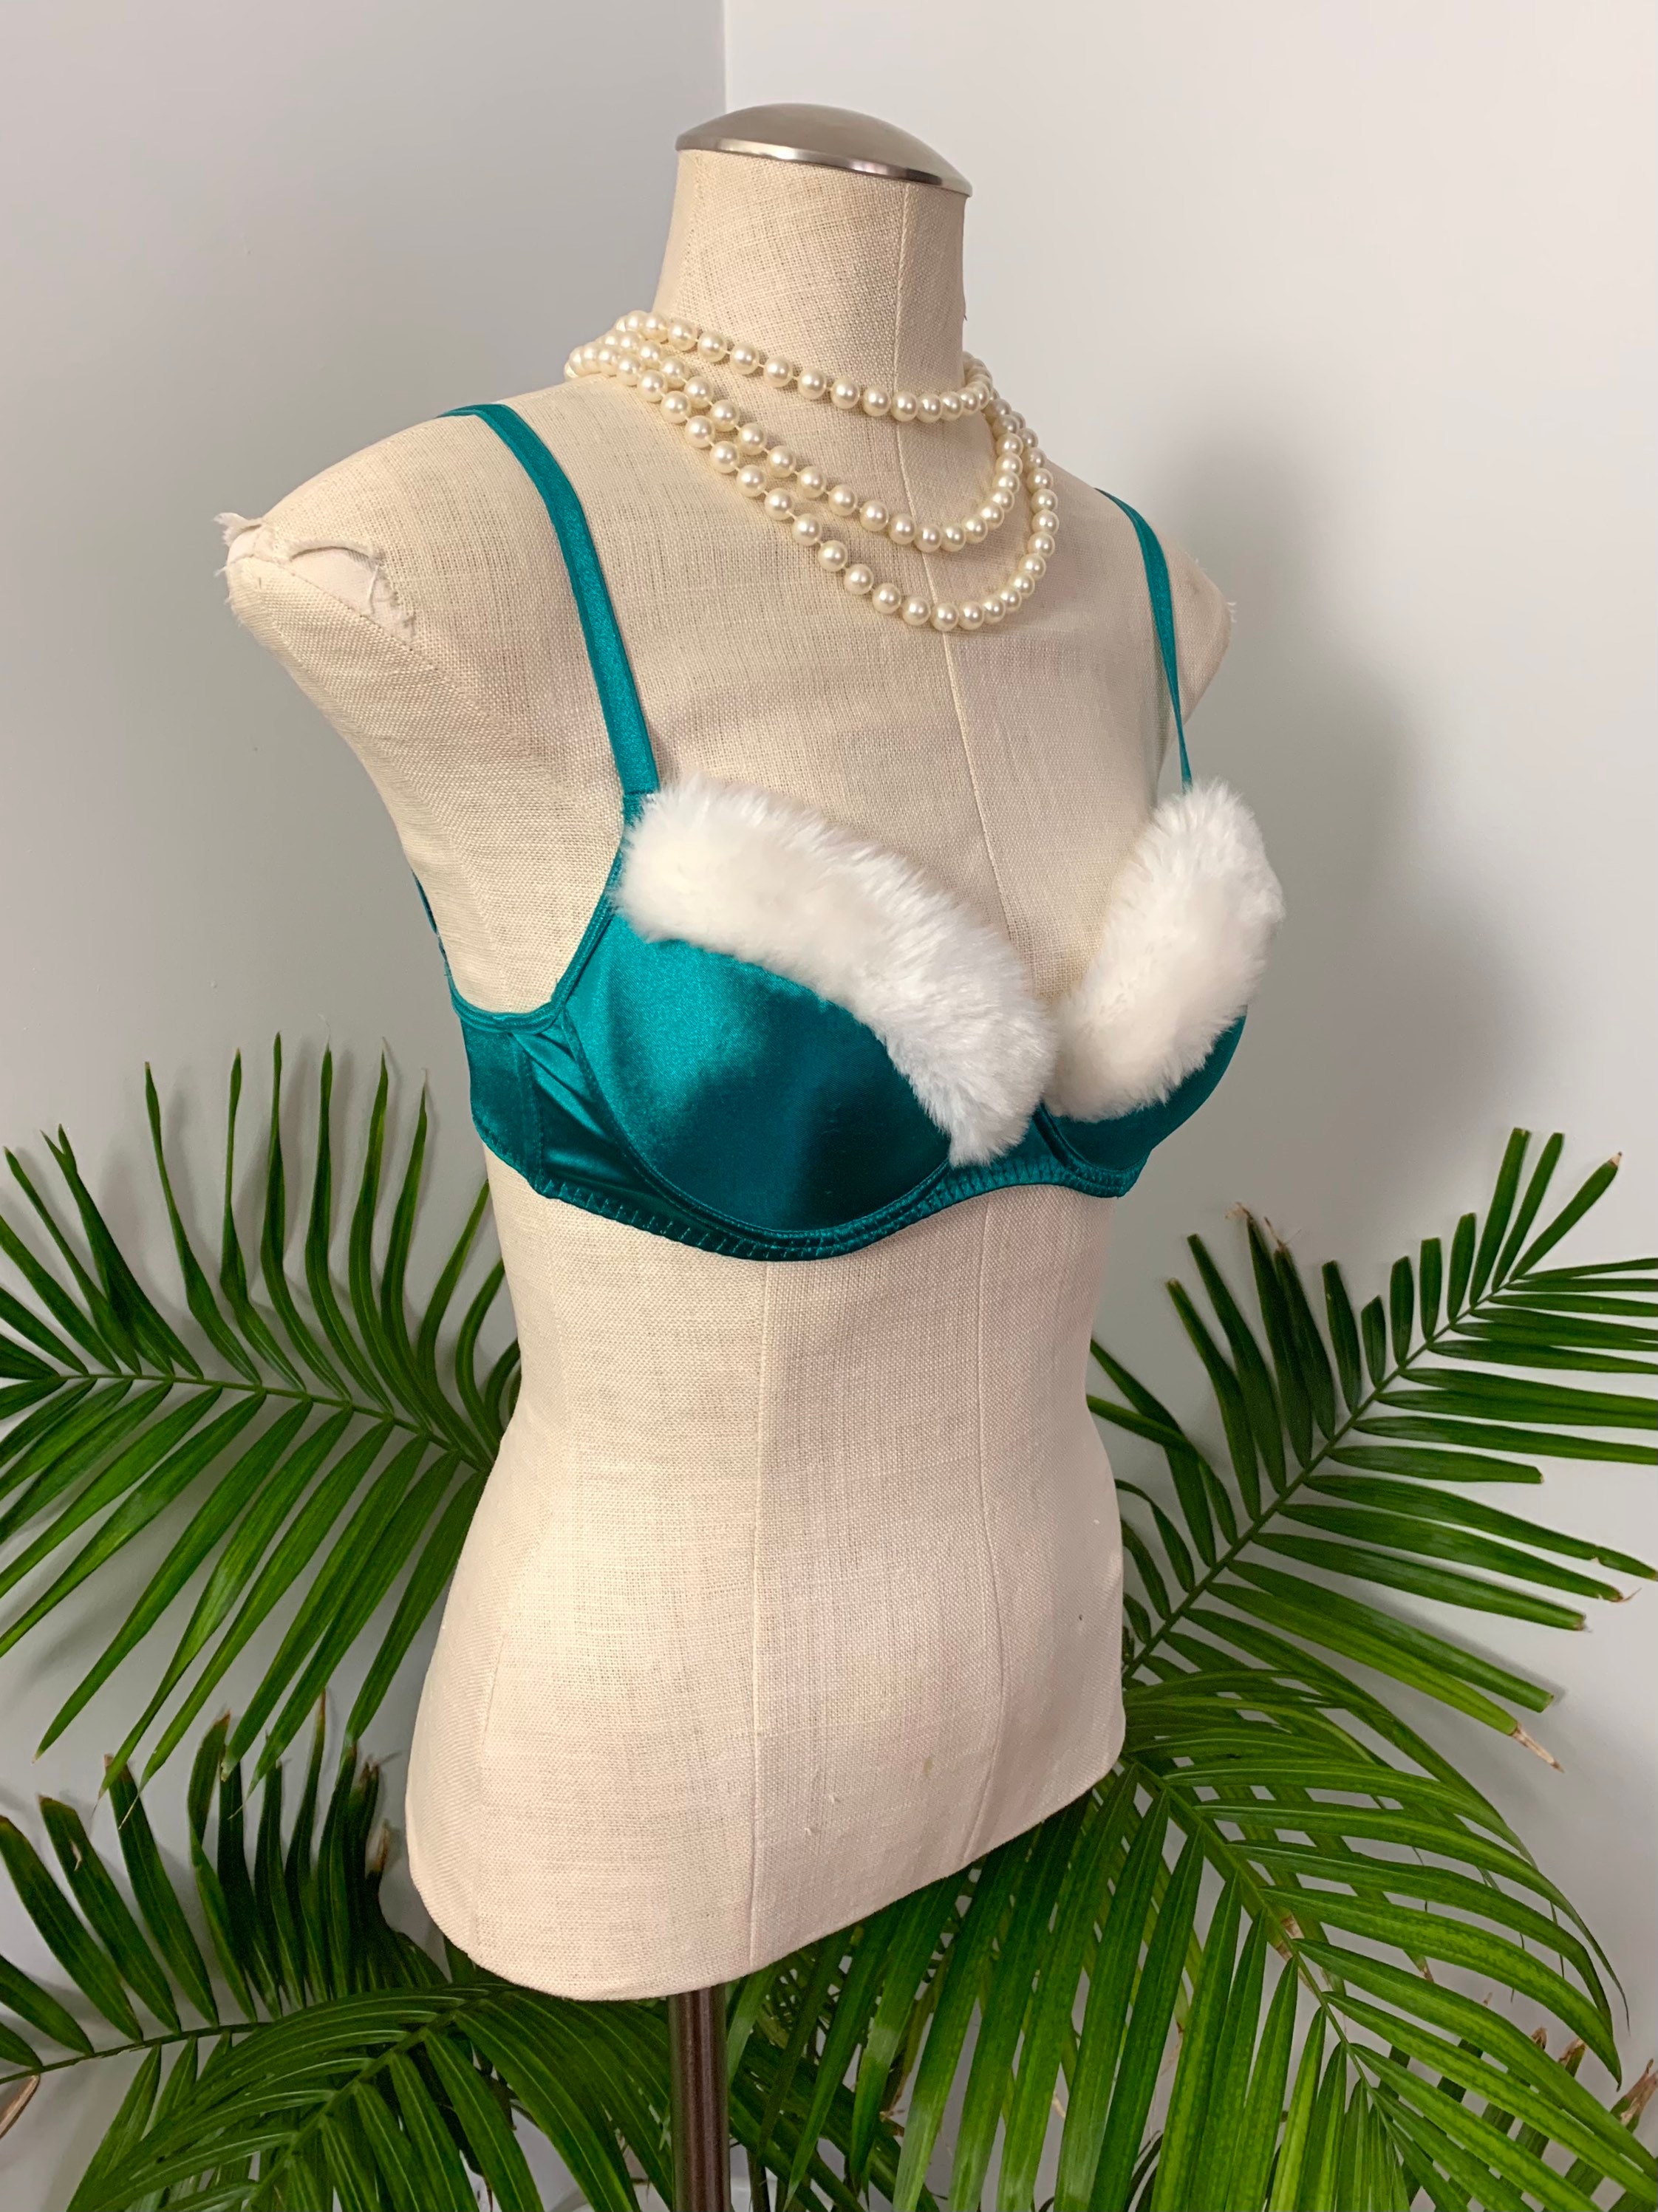 VINTAGE HOLIDAY BRA Teal Green Satin Bra With Faux Fur Trim, Xmas Winter  Lingerie, Retro Chic Pinup Style Brassiere 1990s 